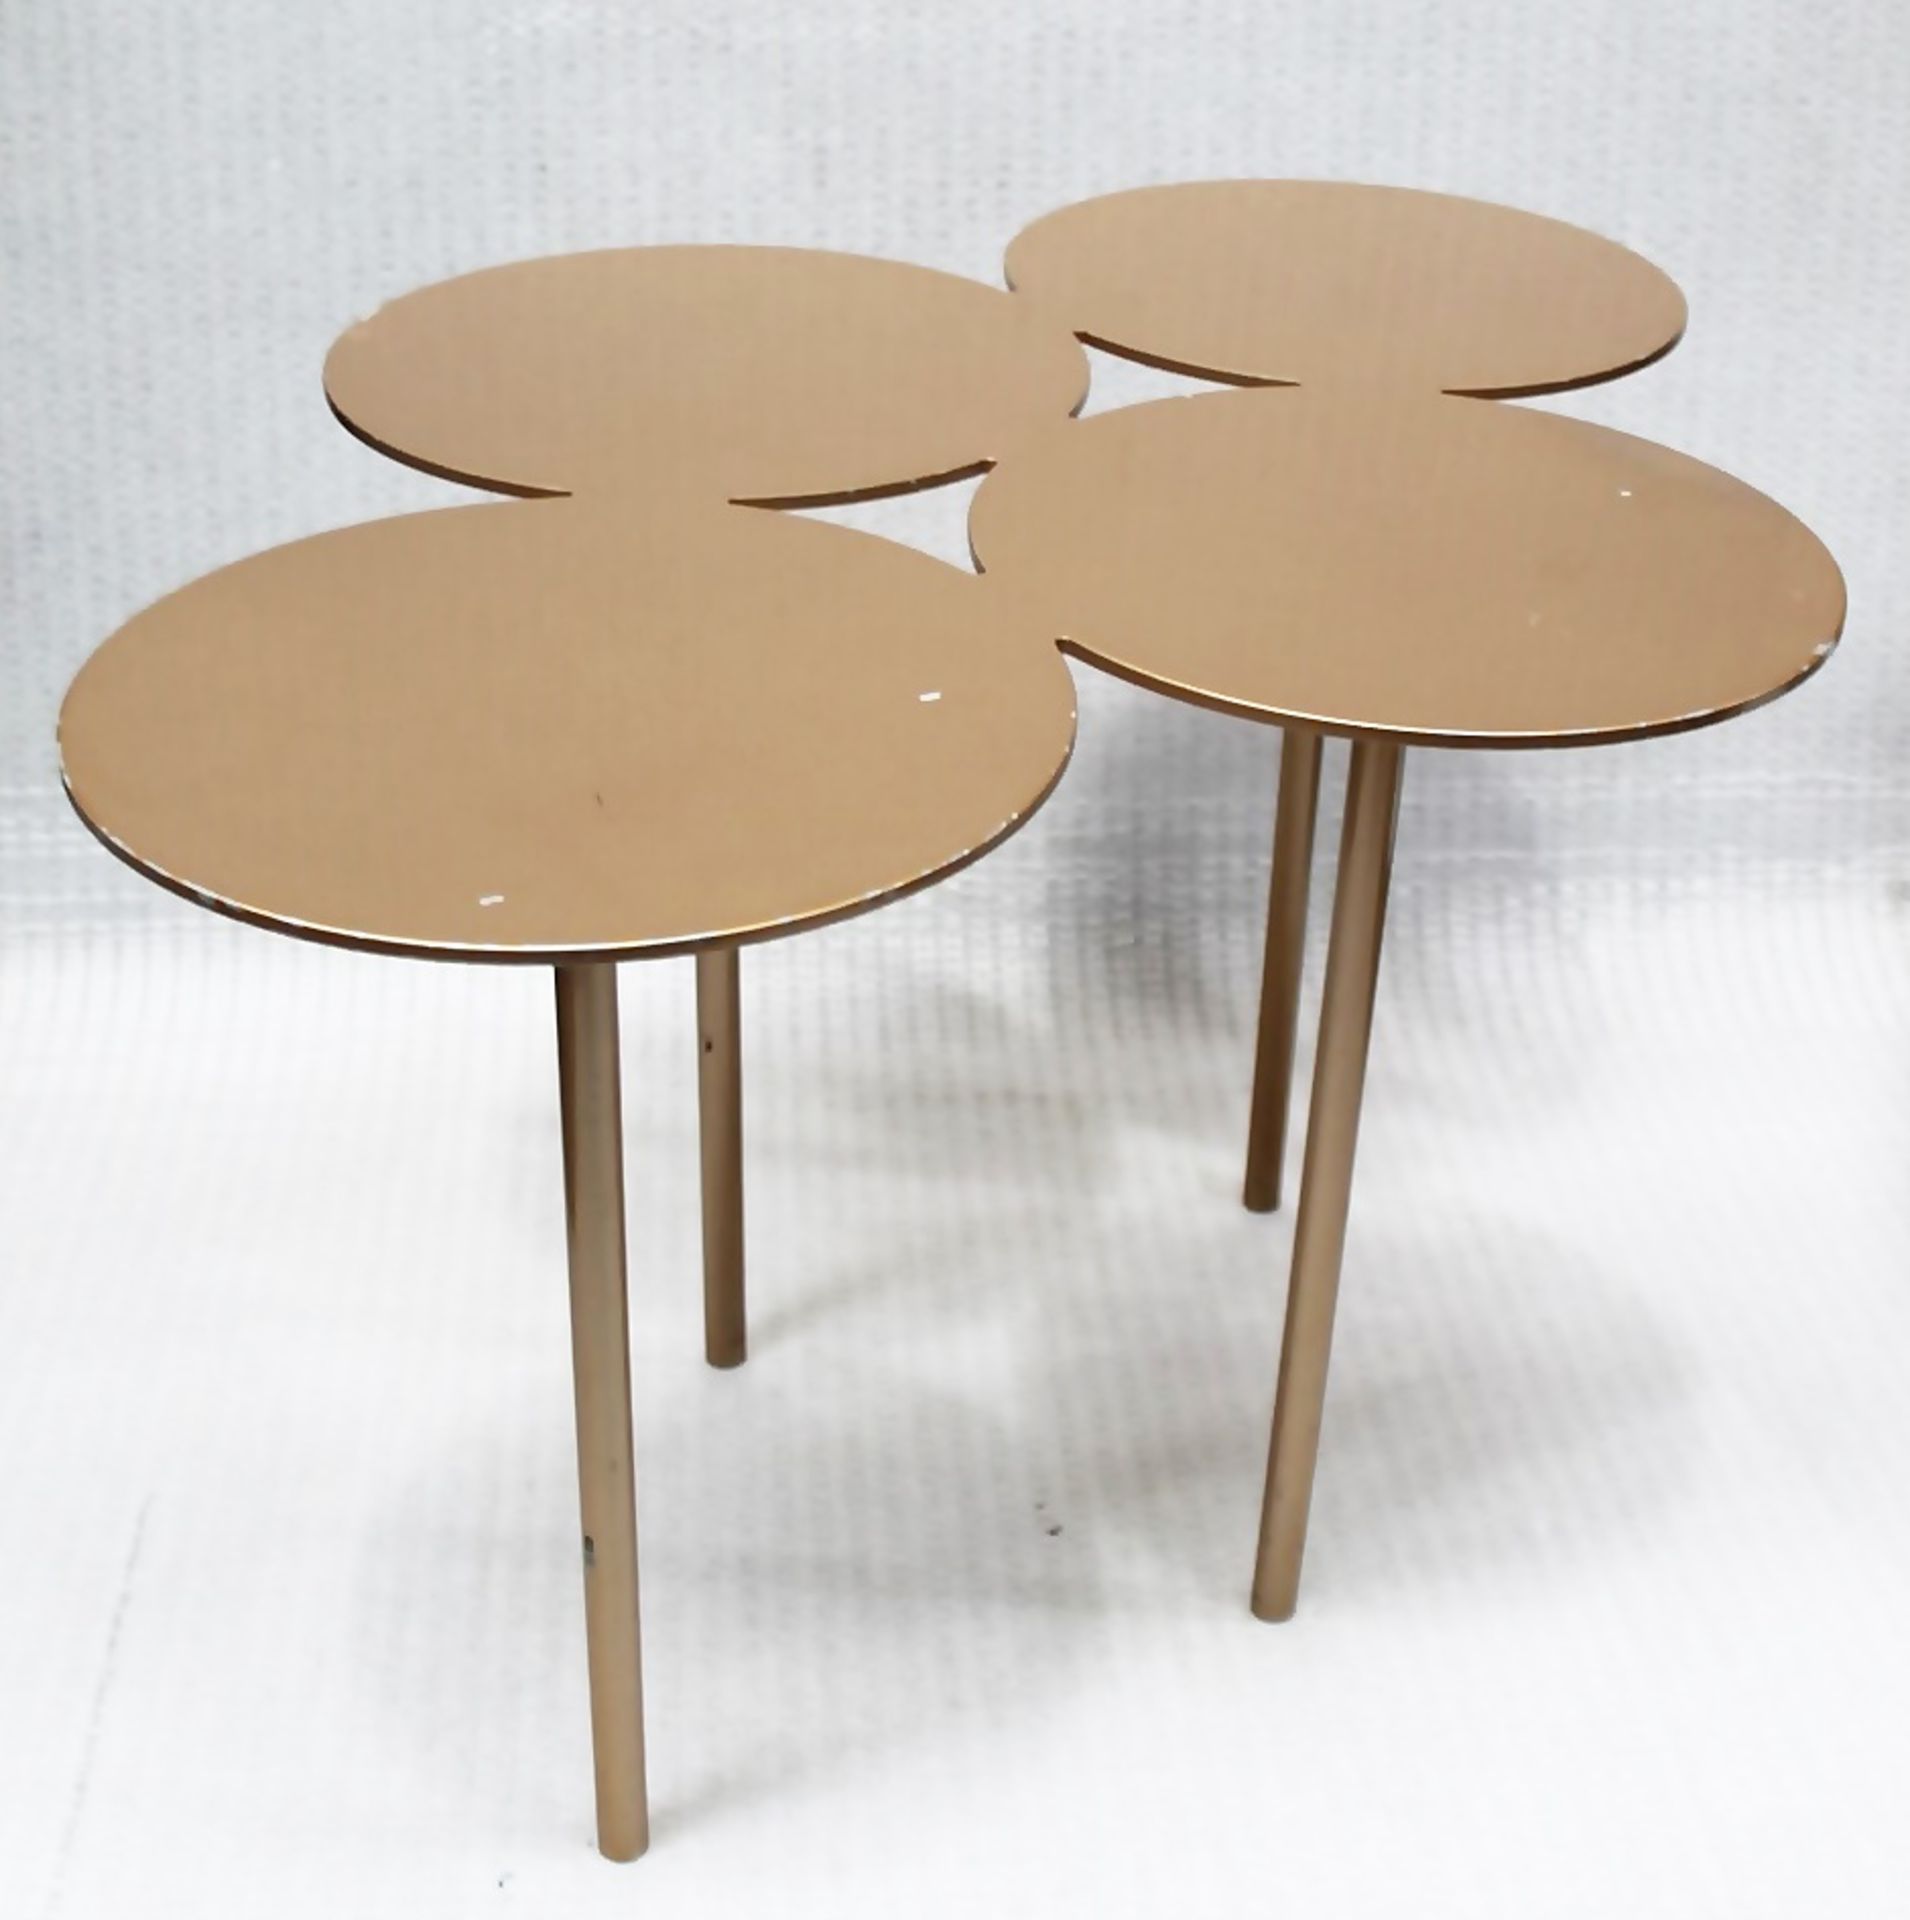 1 x Designer 4-Circle Coffee Table In Gold - Image 5 of 7